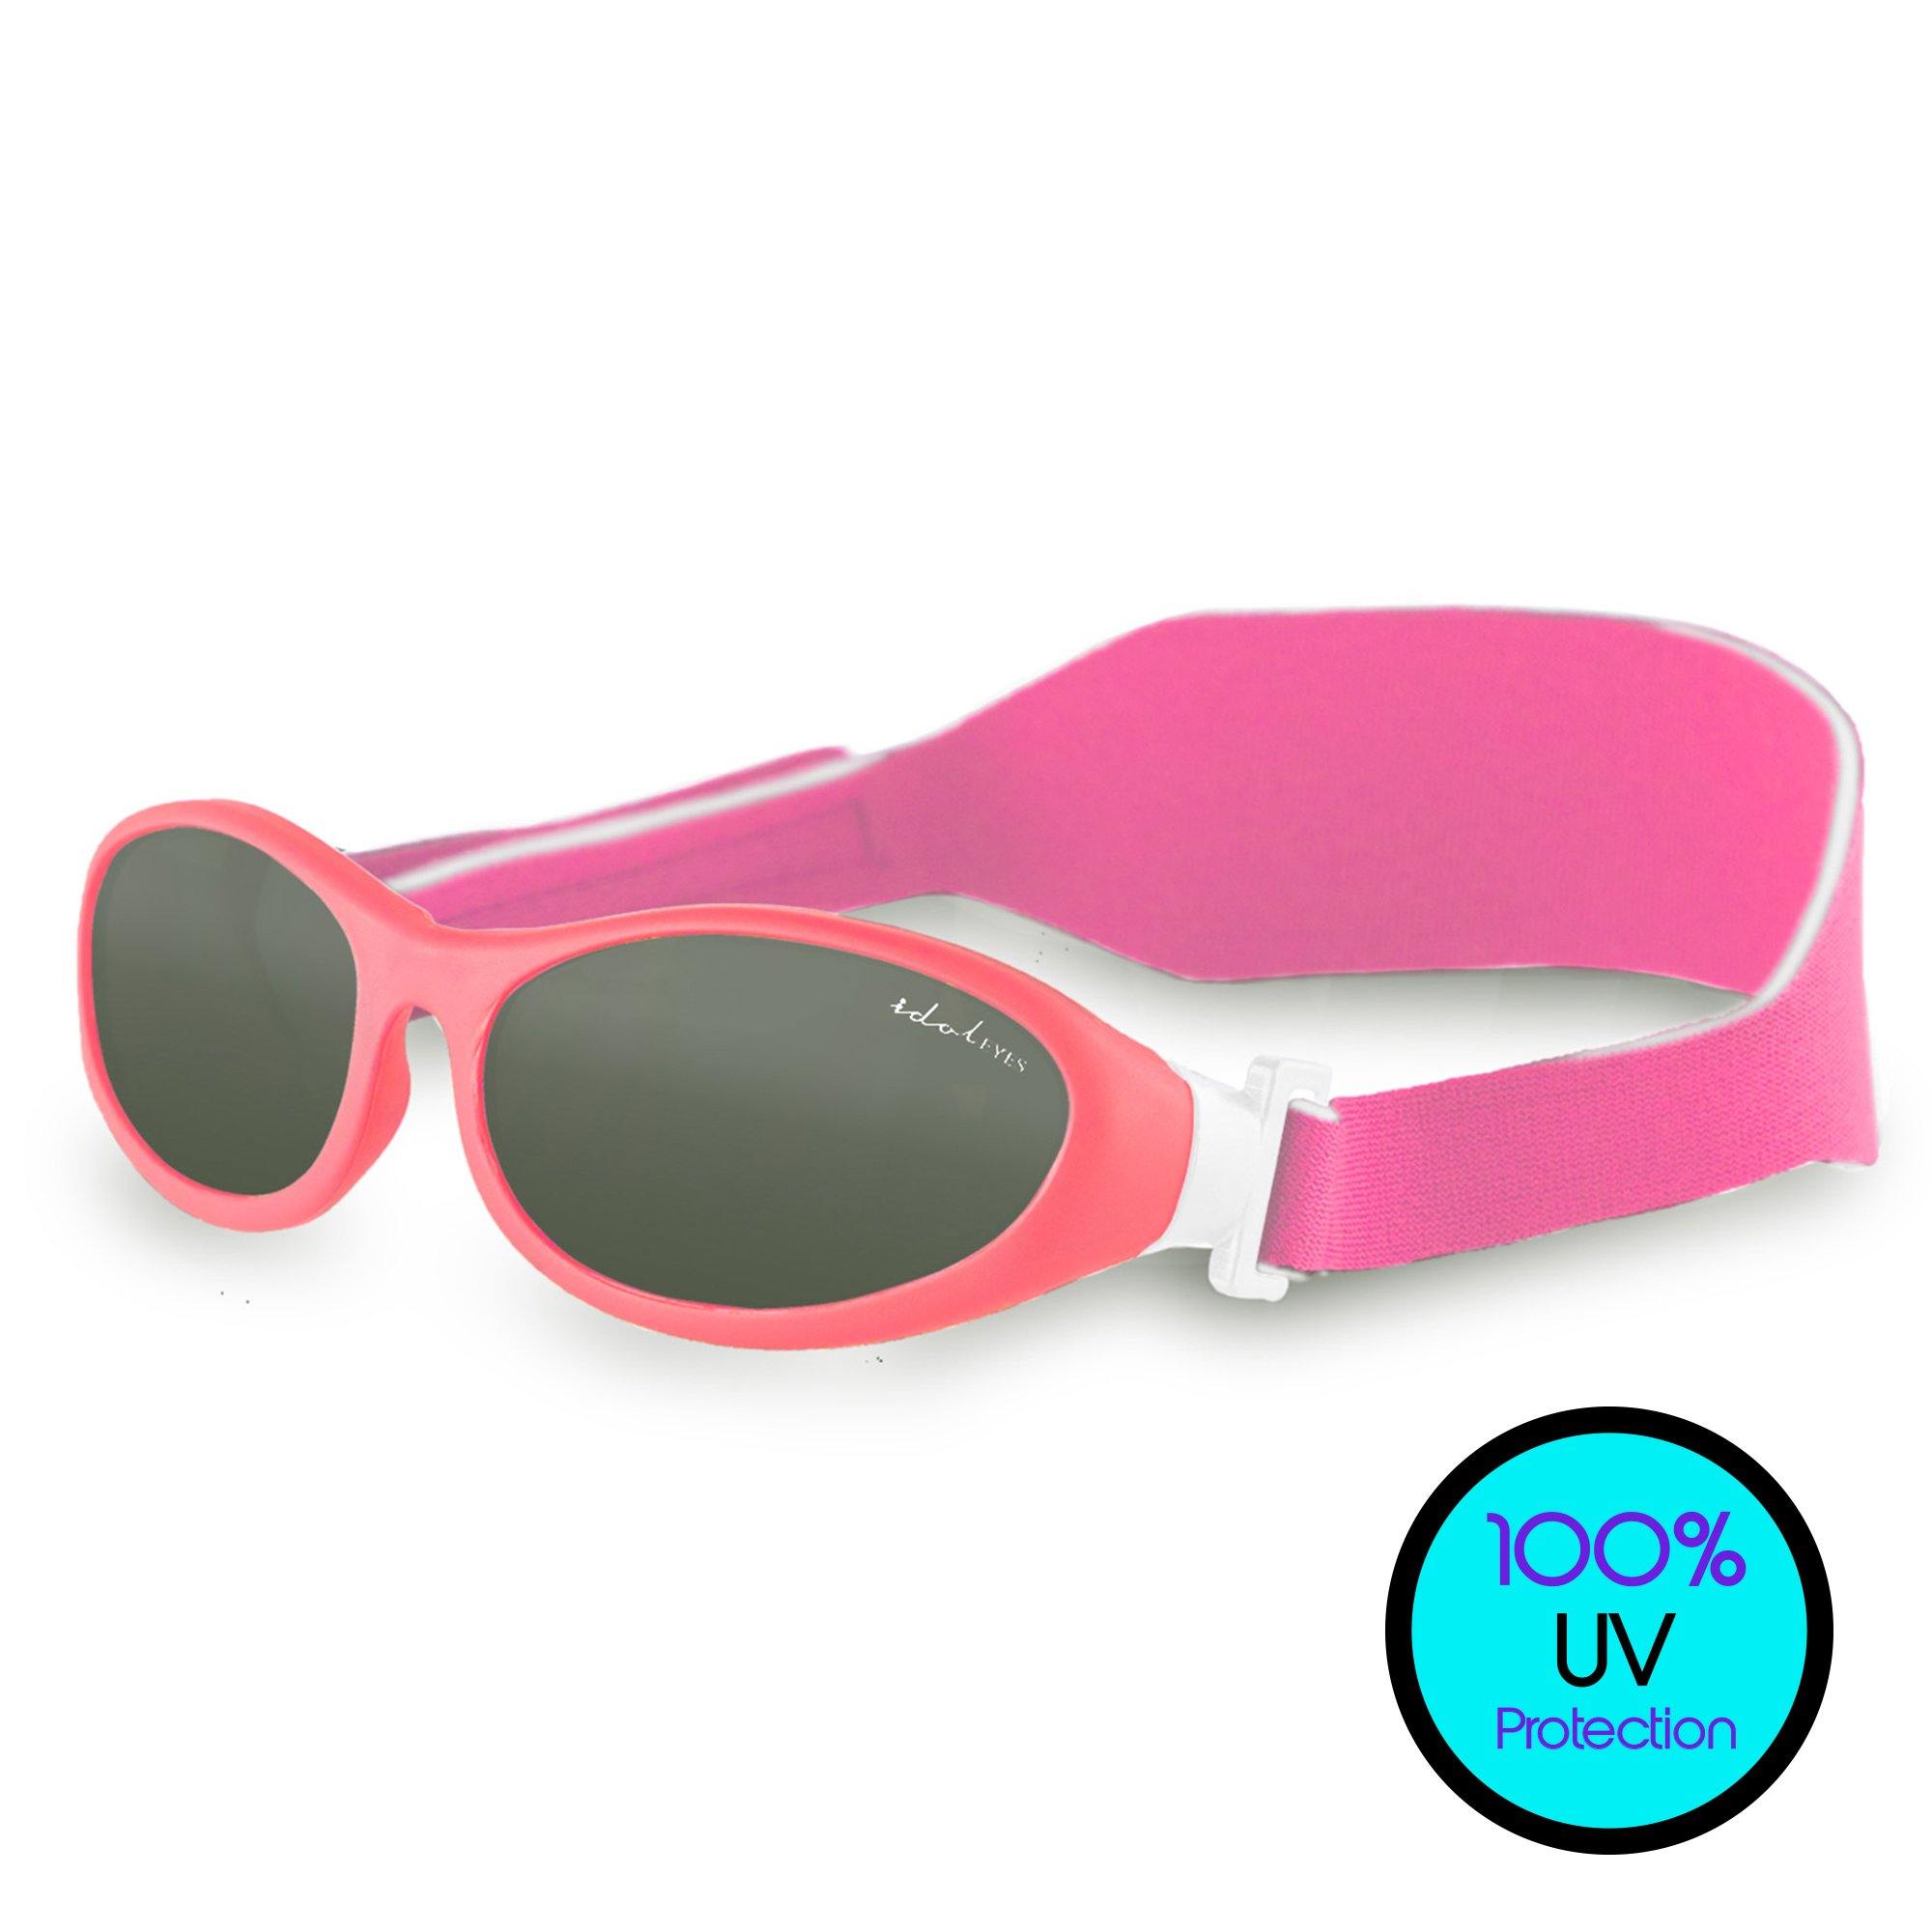 Baby Wrapz kids sunglasses are rated to block the strongest rays! These crystal-clear sunglasses for toddlers ages 0-2 years 